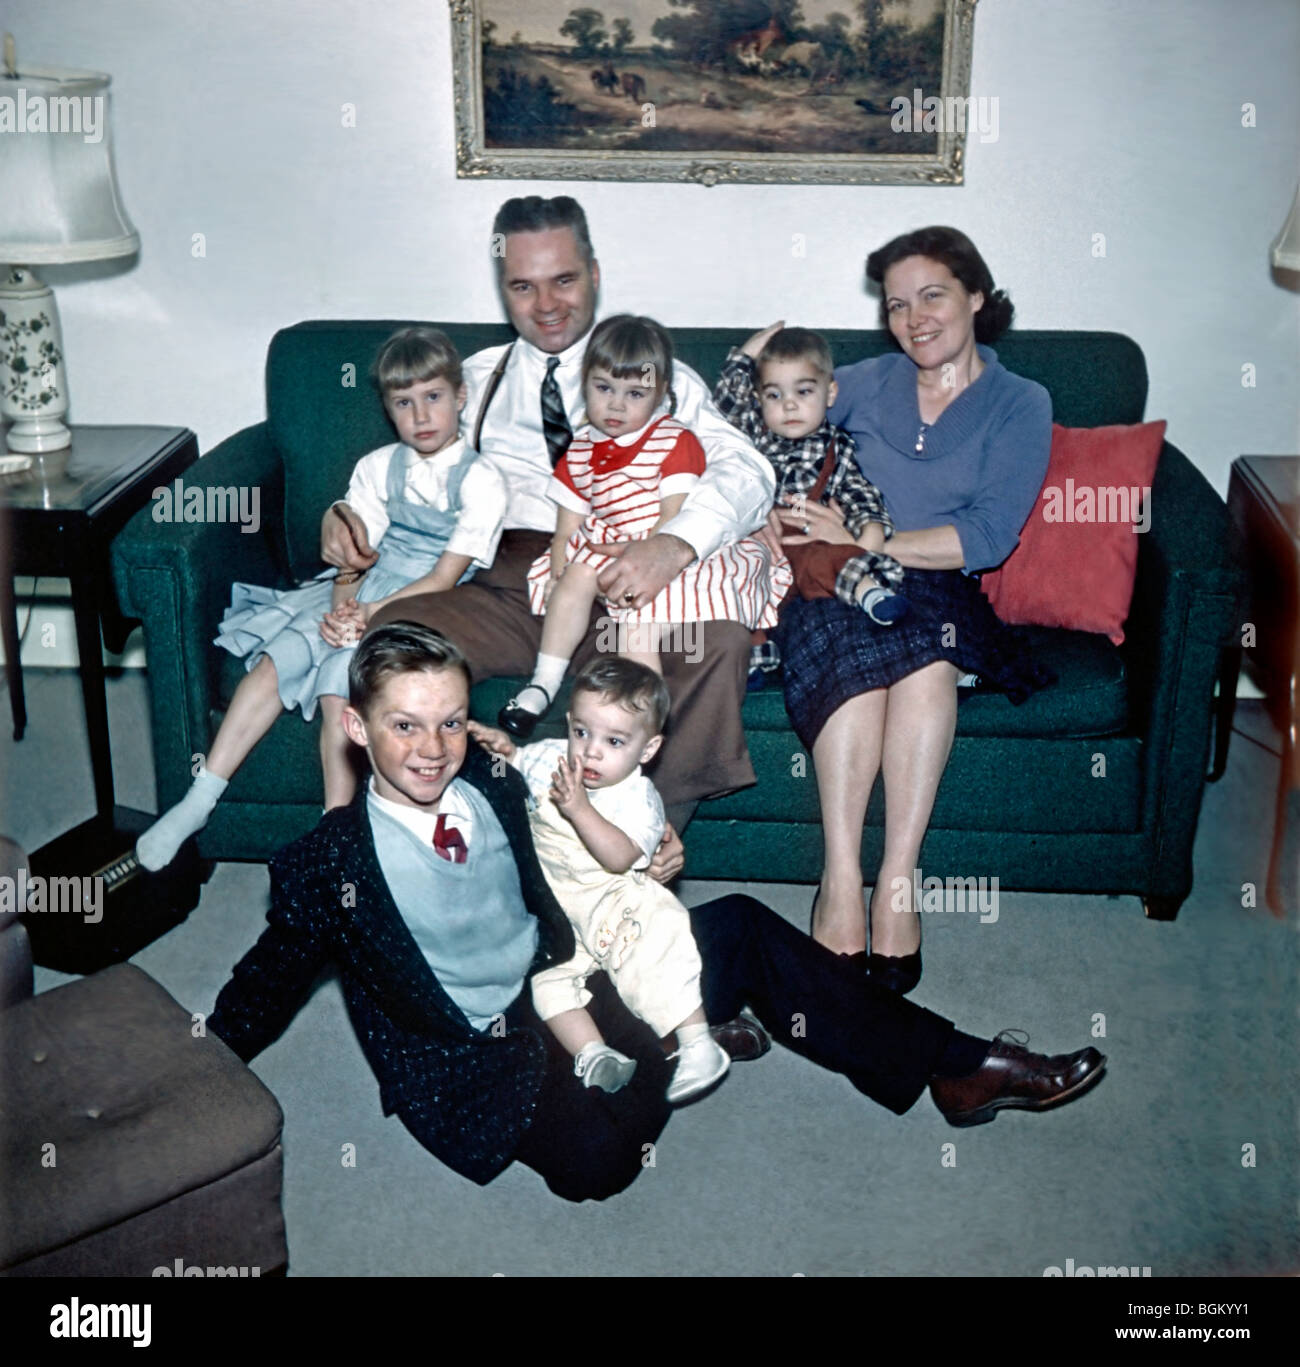 Family Archives Photo. Large Family Portrait "Old Family Photos" Group sitting on Couch in Living Room Home, vintage American photos, New Jersey 1950s Stock Photo